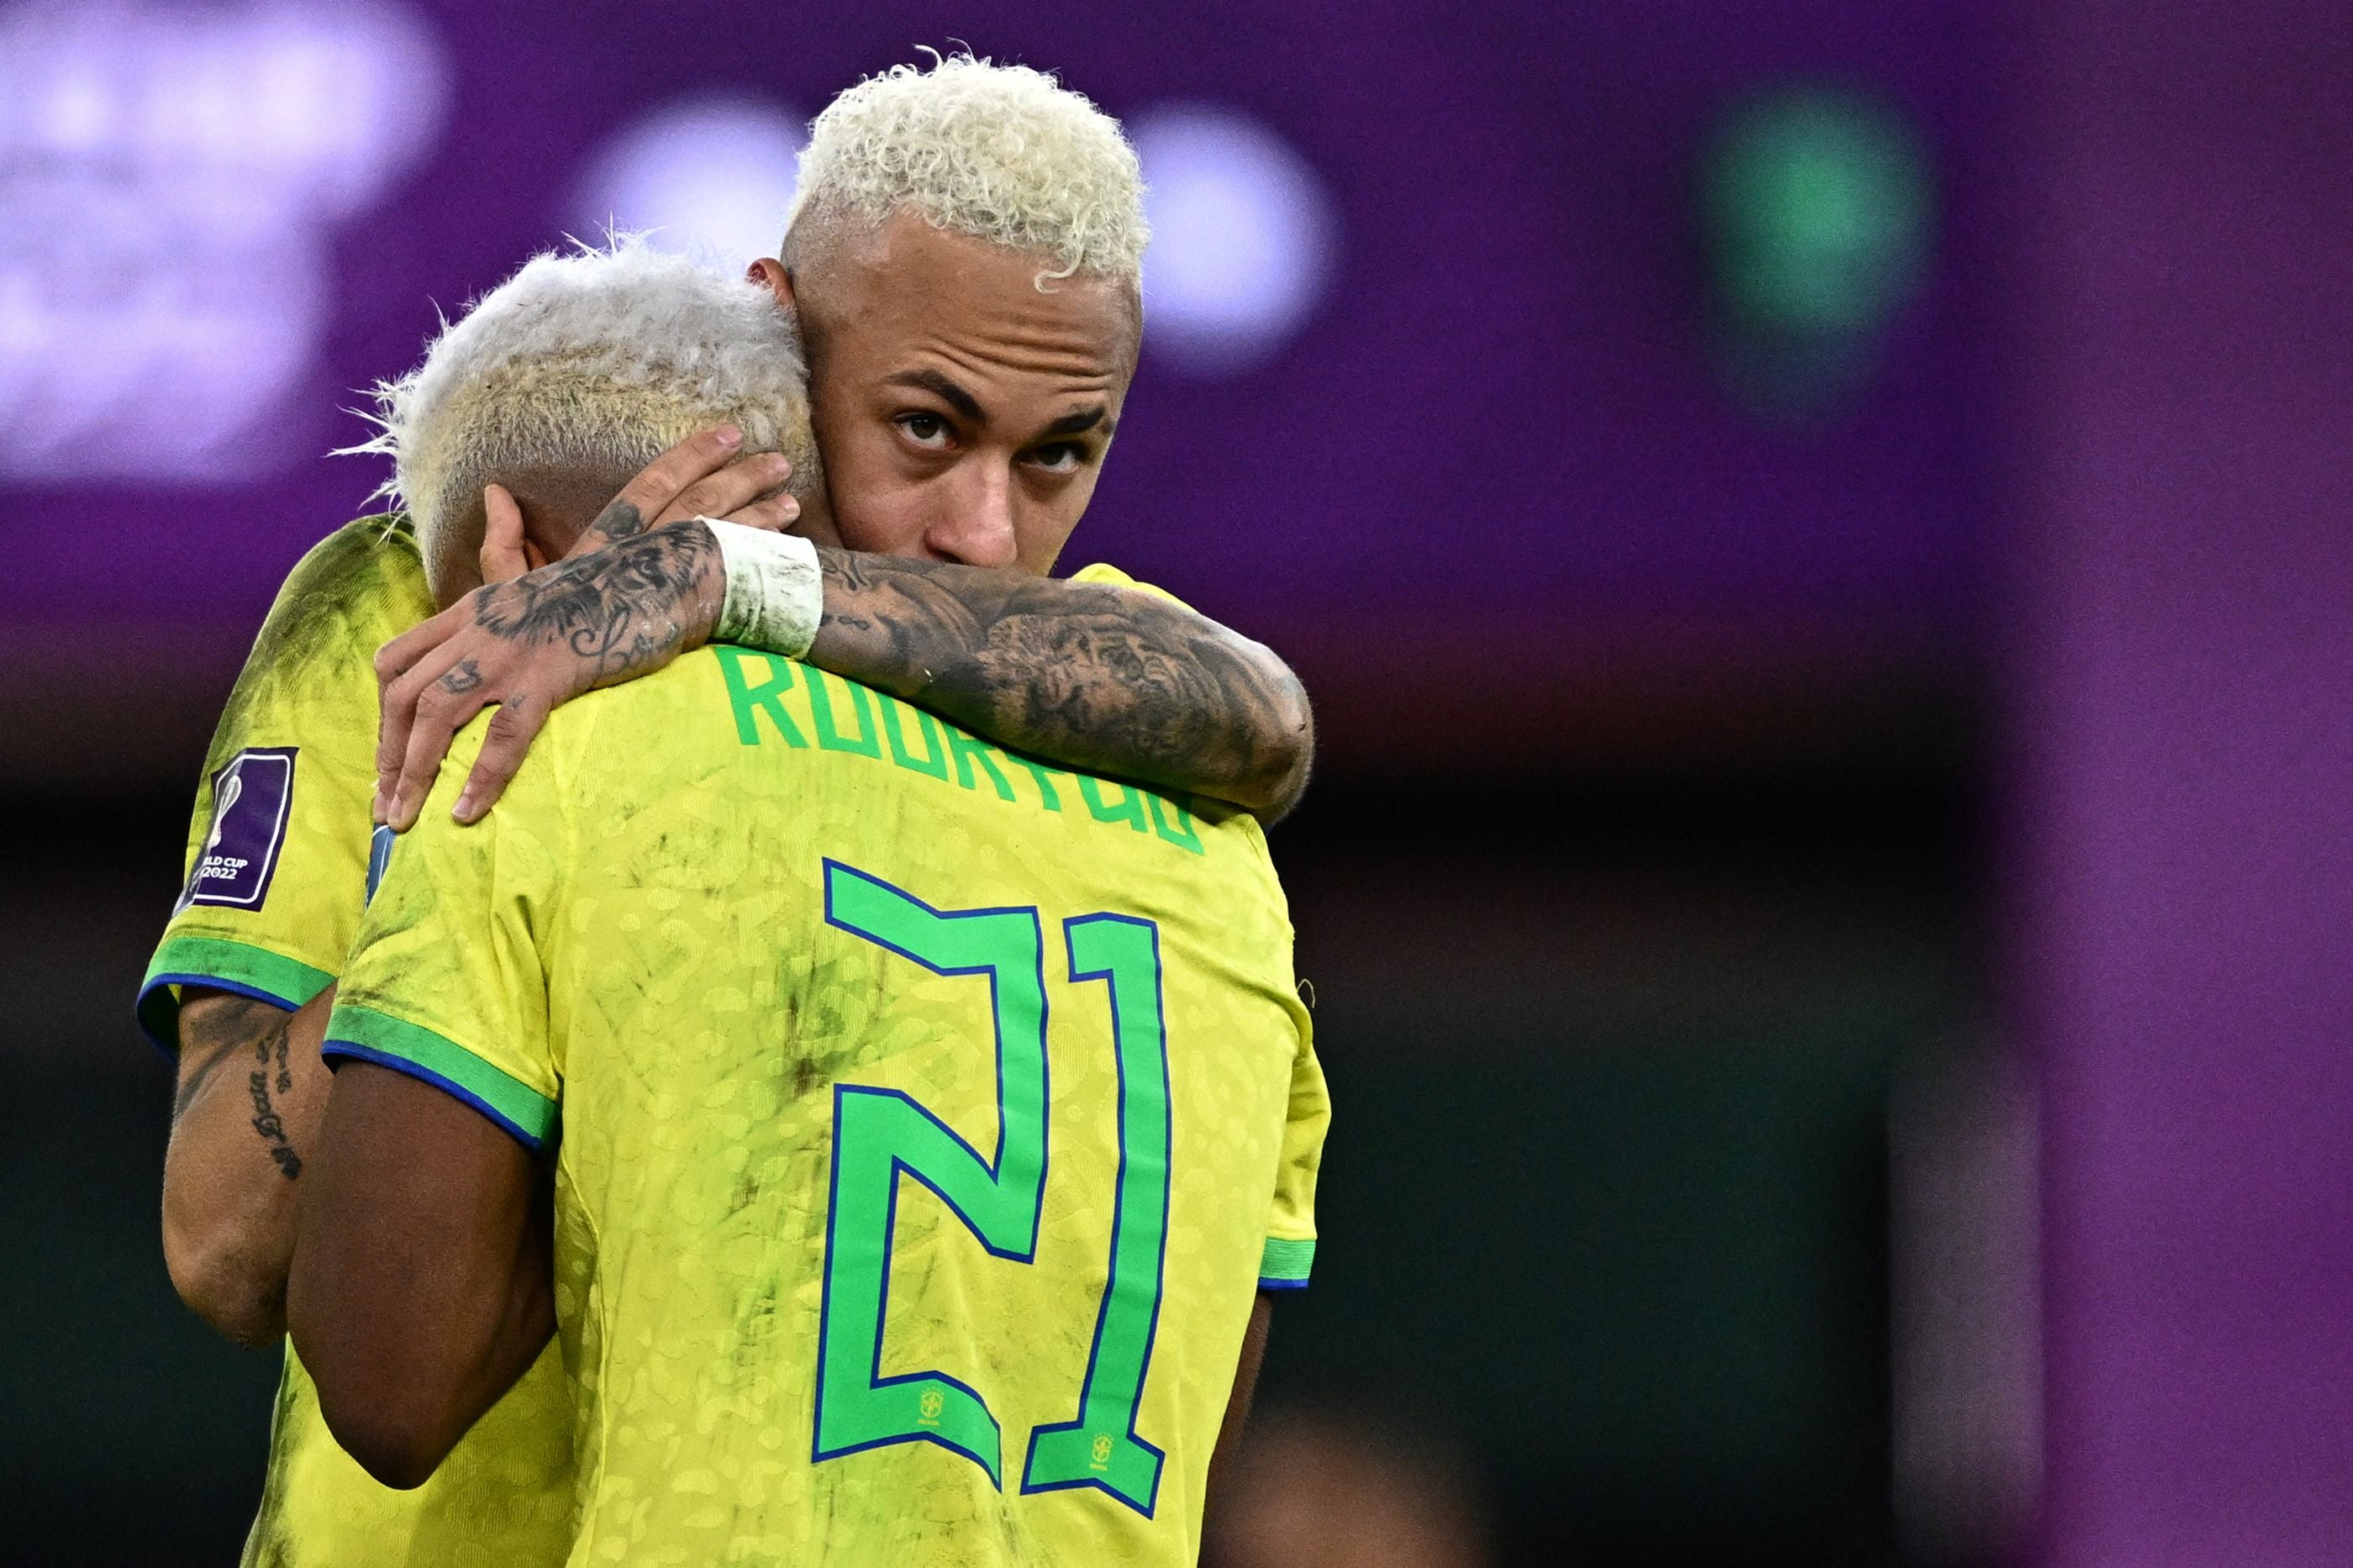 Neymar left out of main Brazil team at World Cup camp